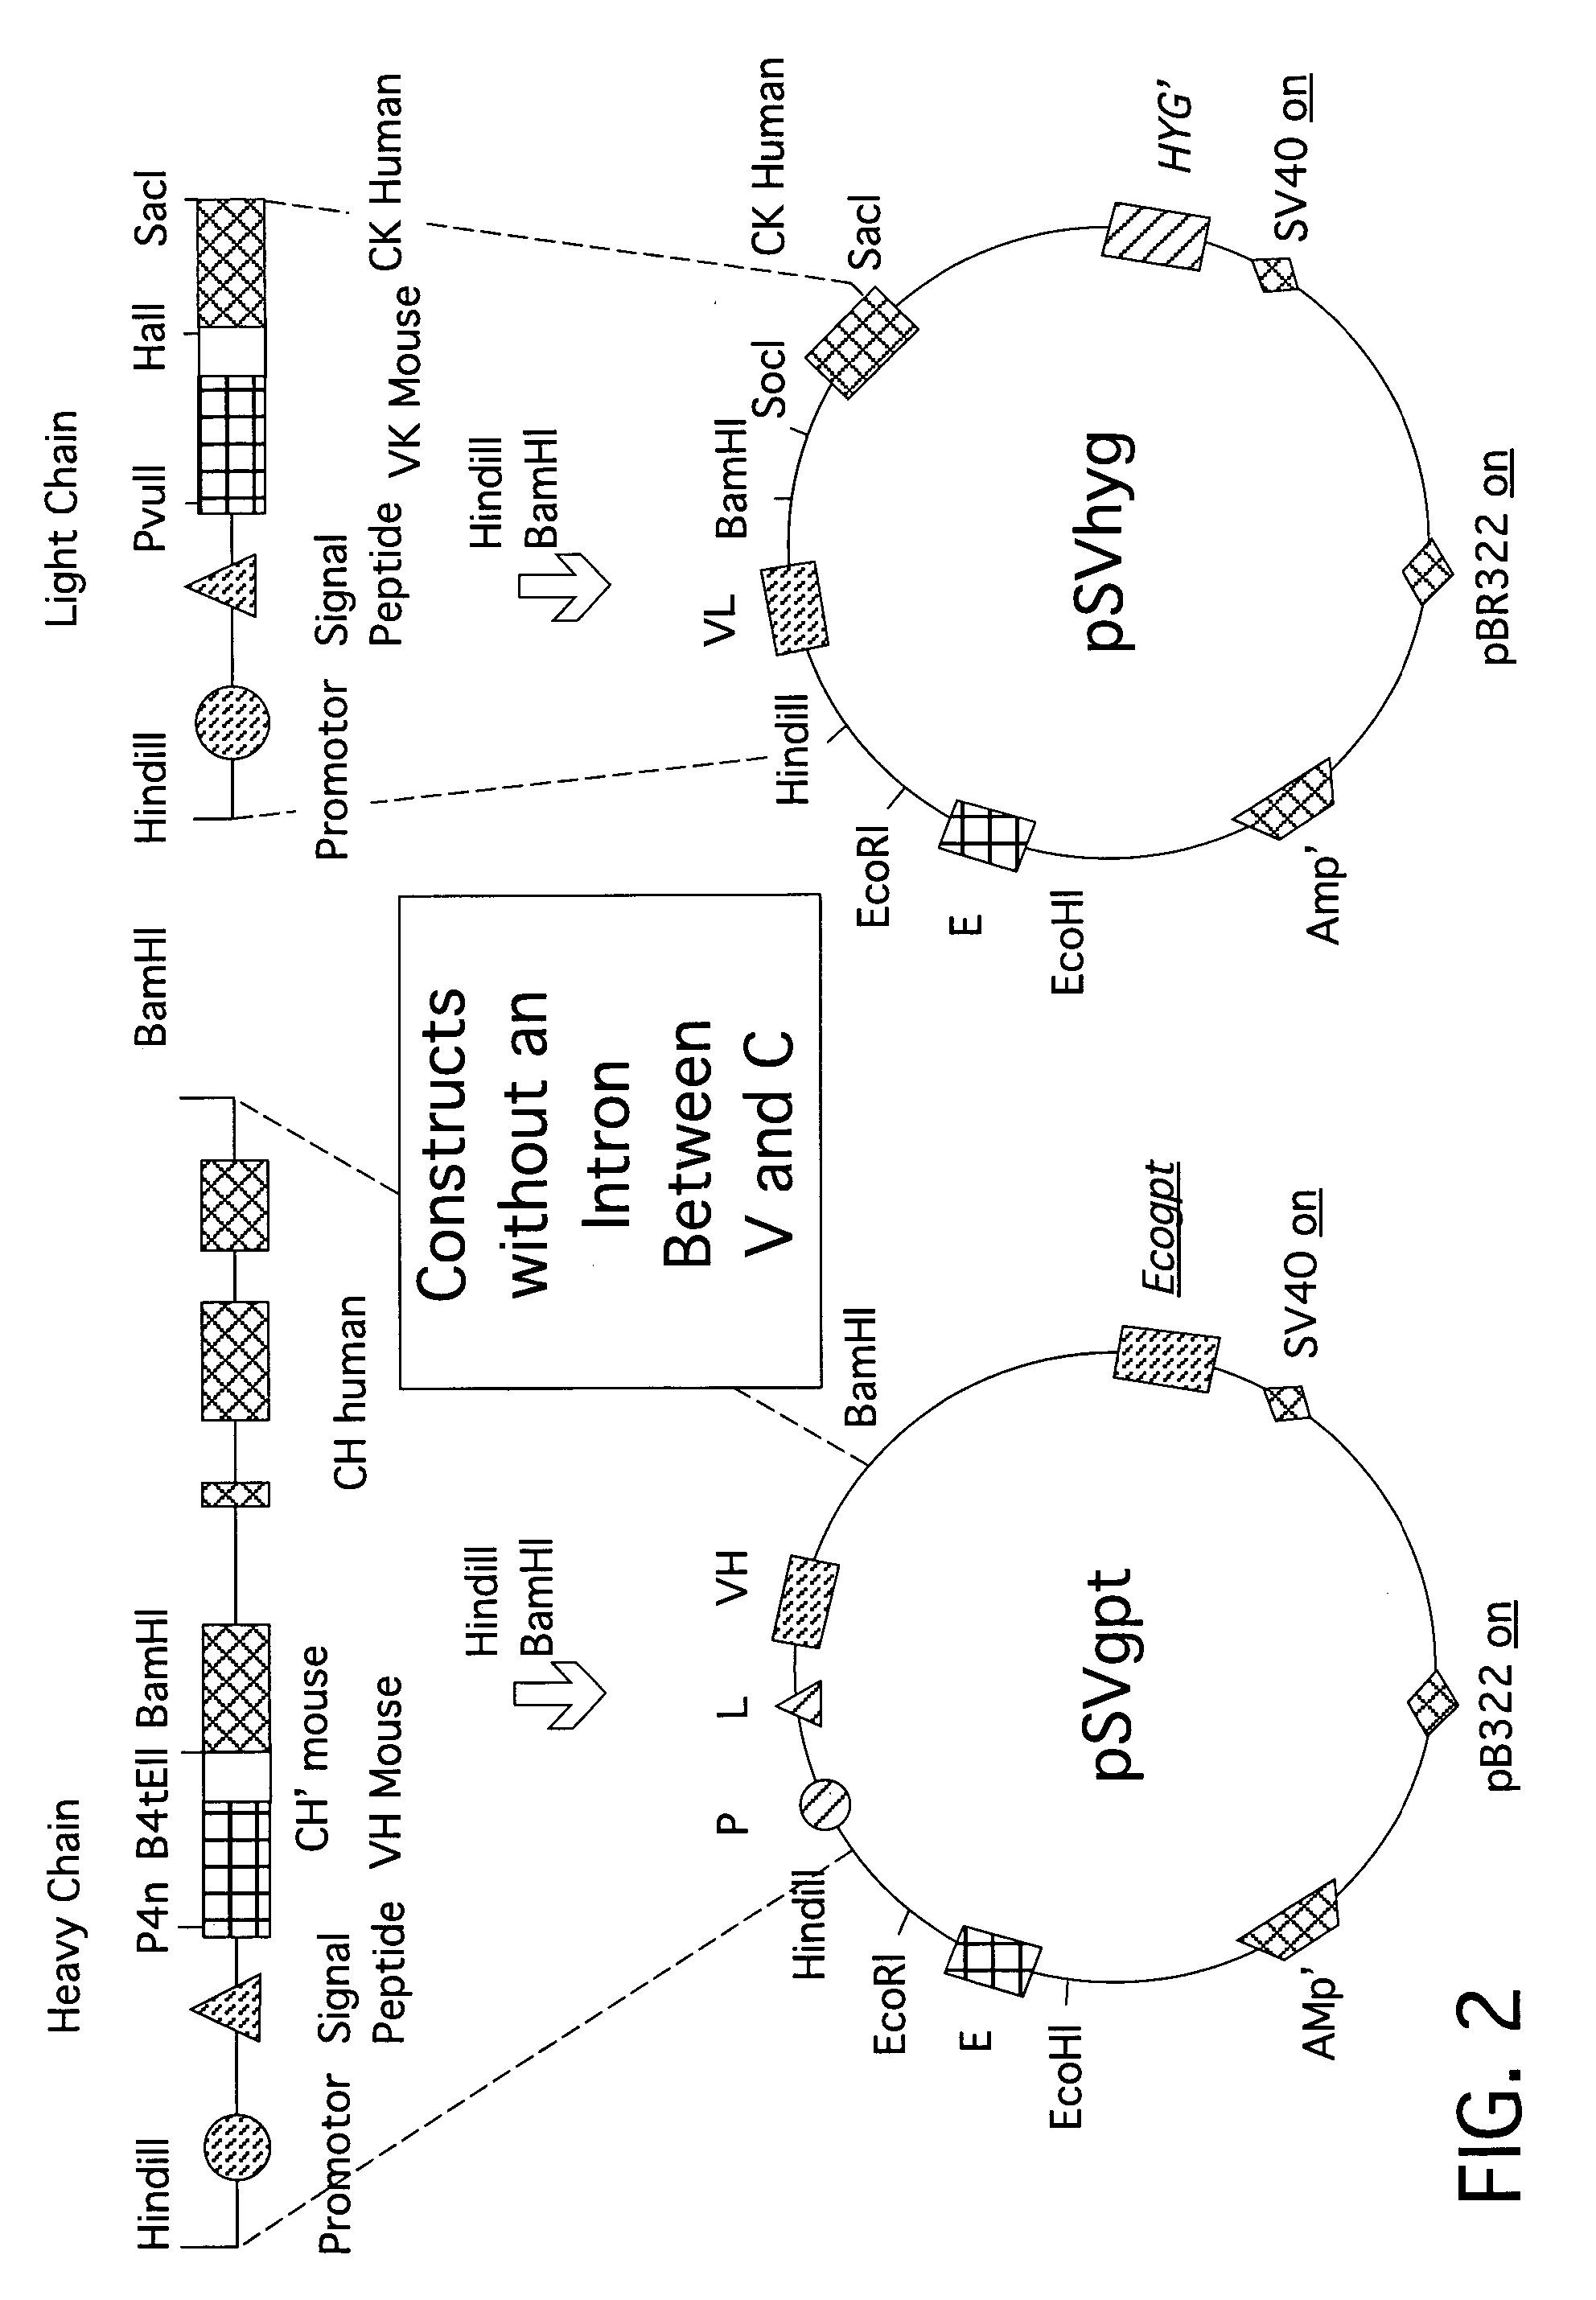 Recombinant DNA-molecule complex for the expression of anti-human-interferon-gamma chimeric antibodies or antibody fragments